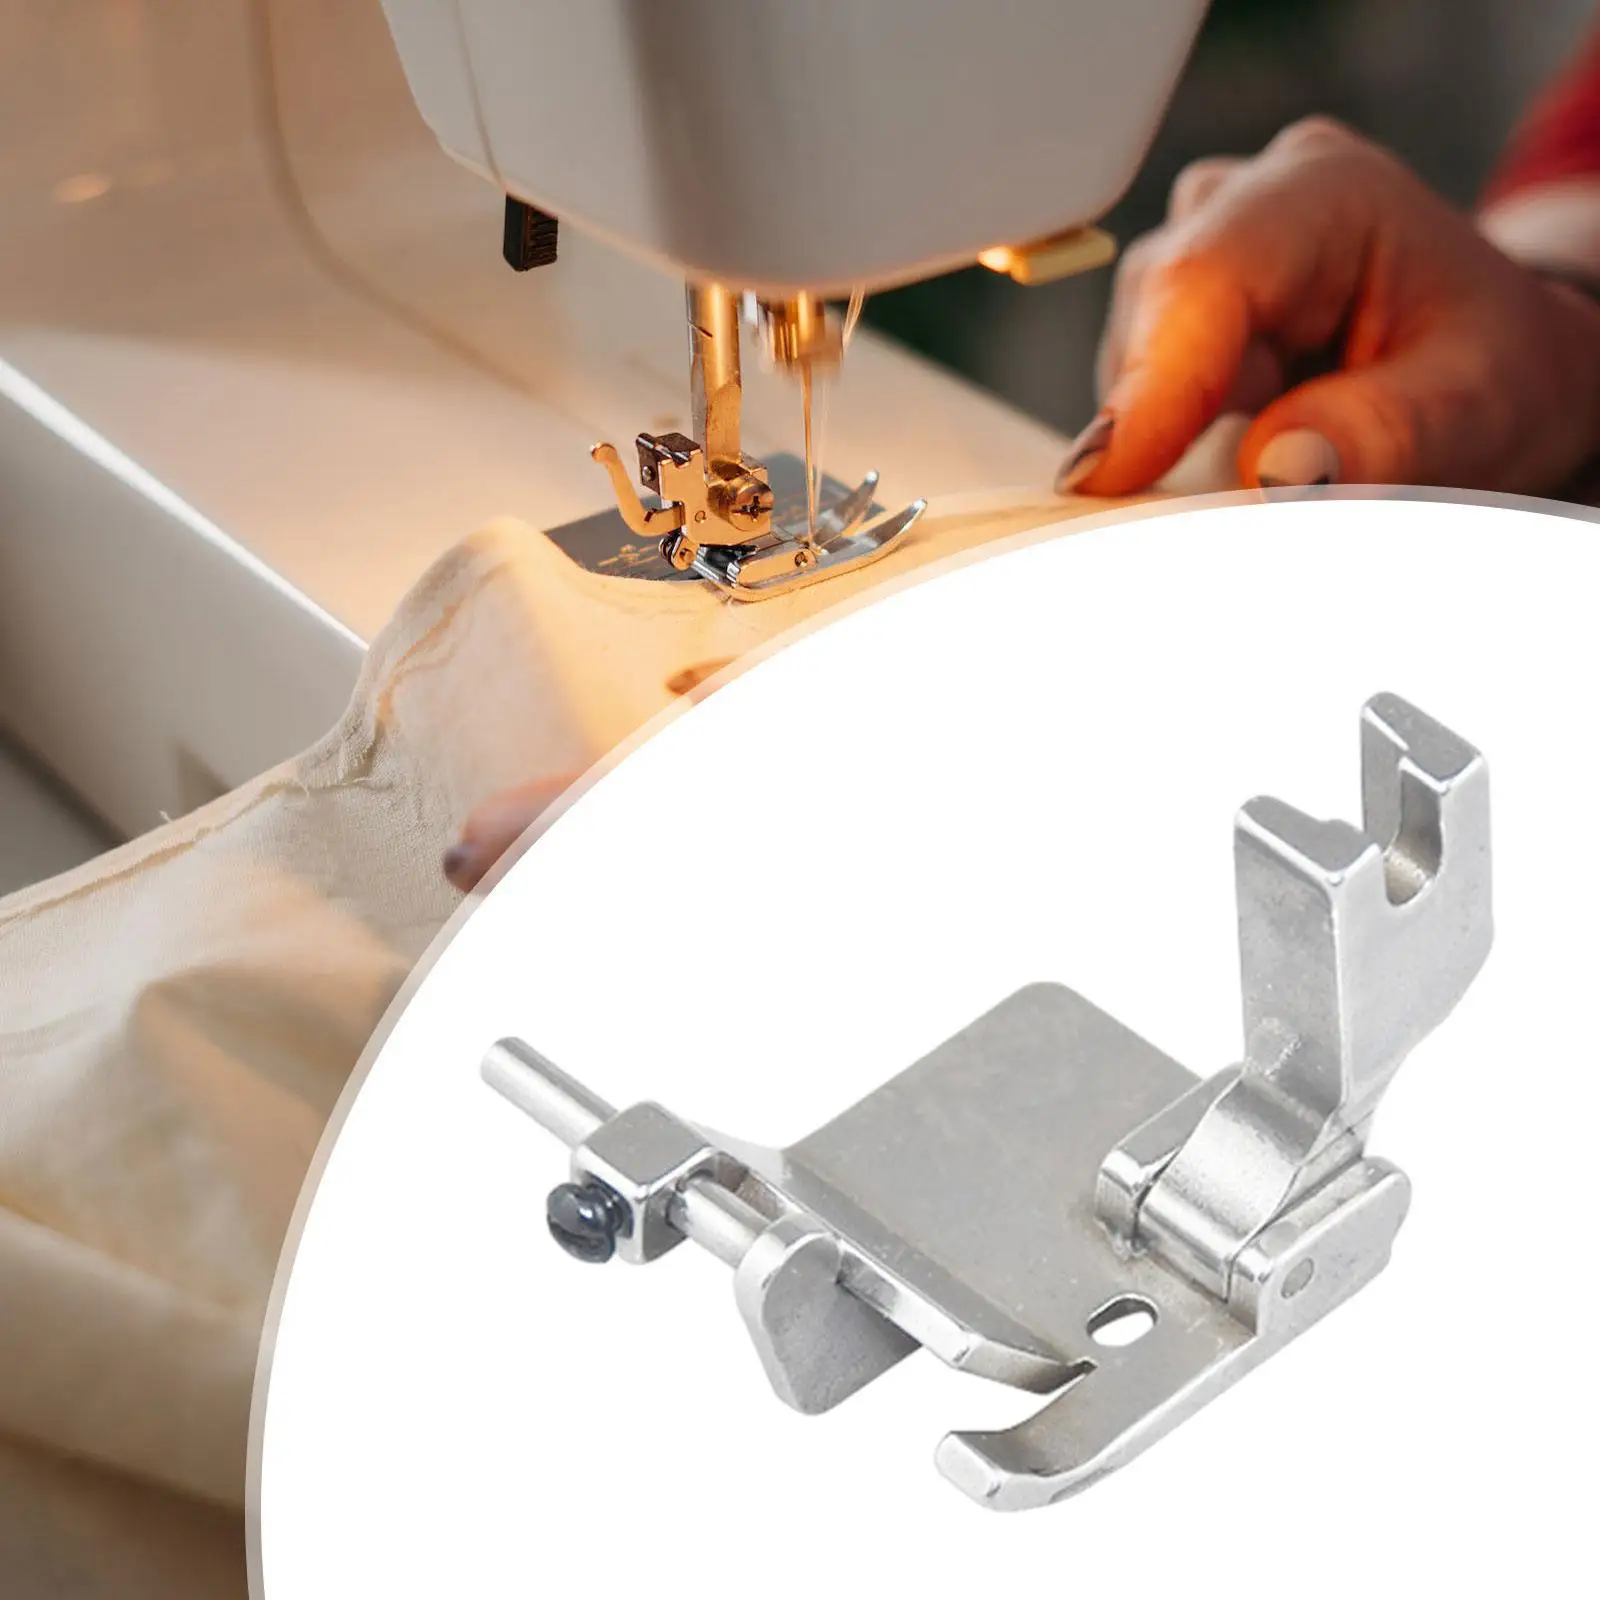 Rolled Hemming Foot Adjustable Presser Foot Sturdy Sewing Machine Guide Hem  Foot Parts for DIY Crafts Overstitch Fabric Cloth - AliExpress